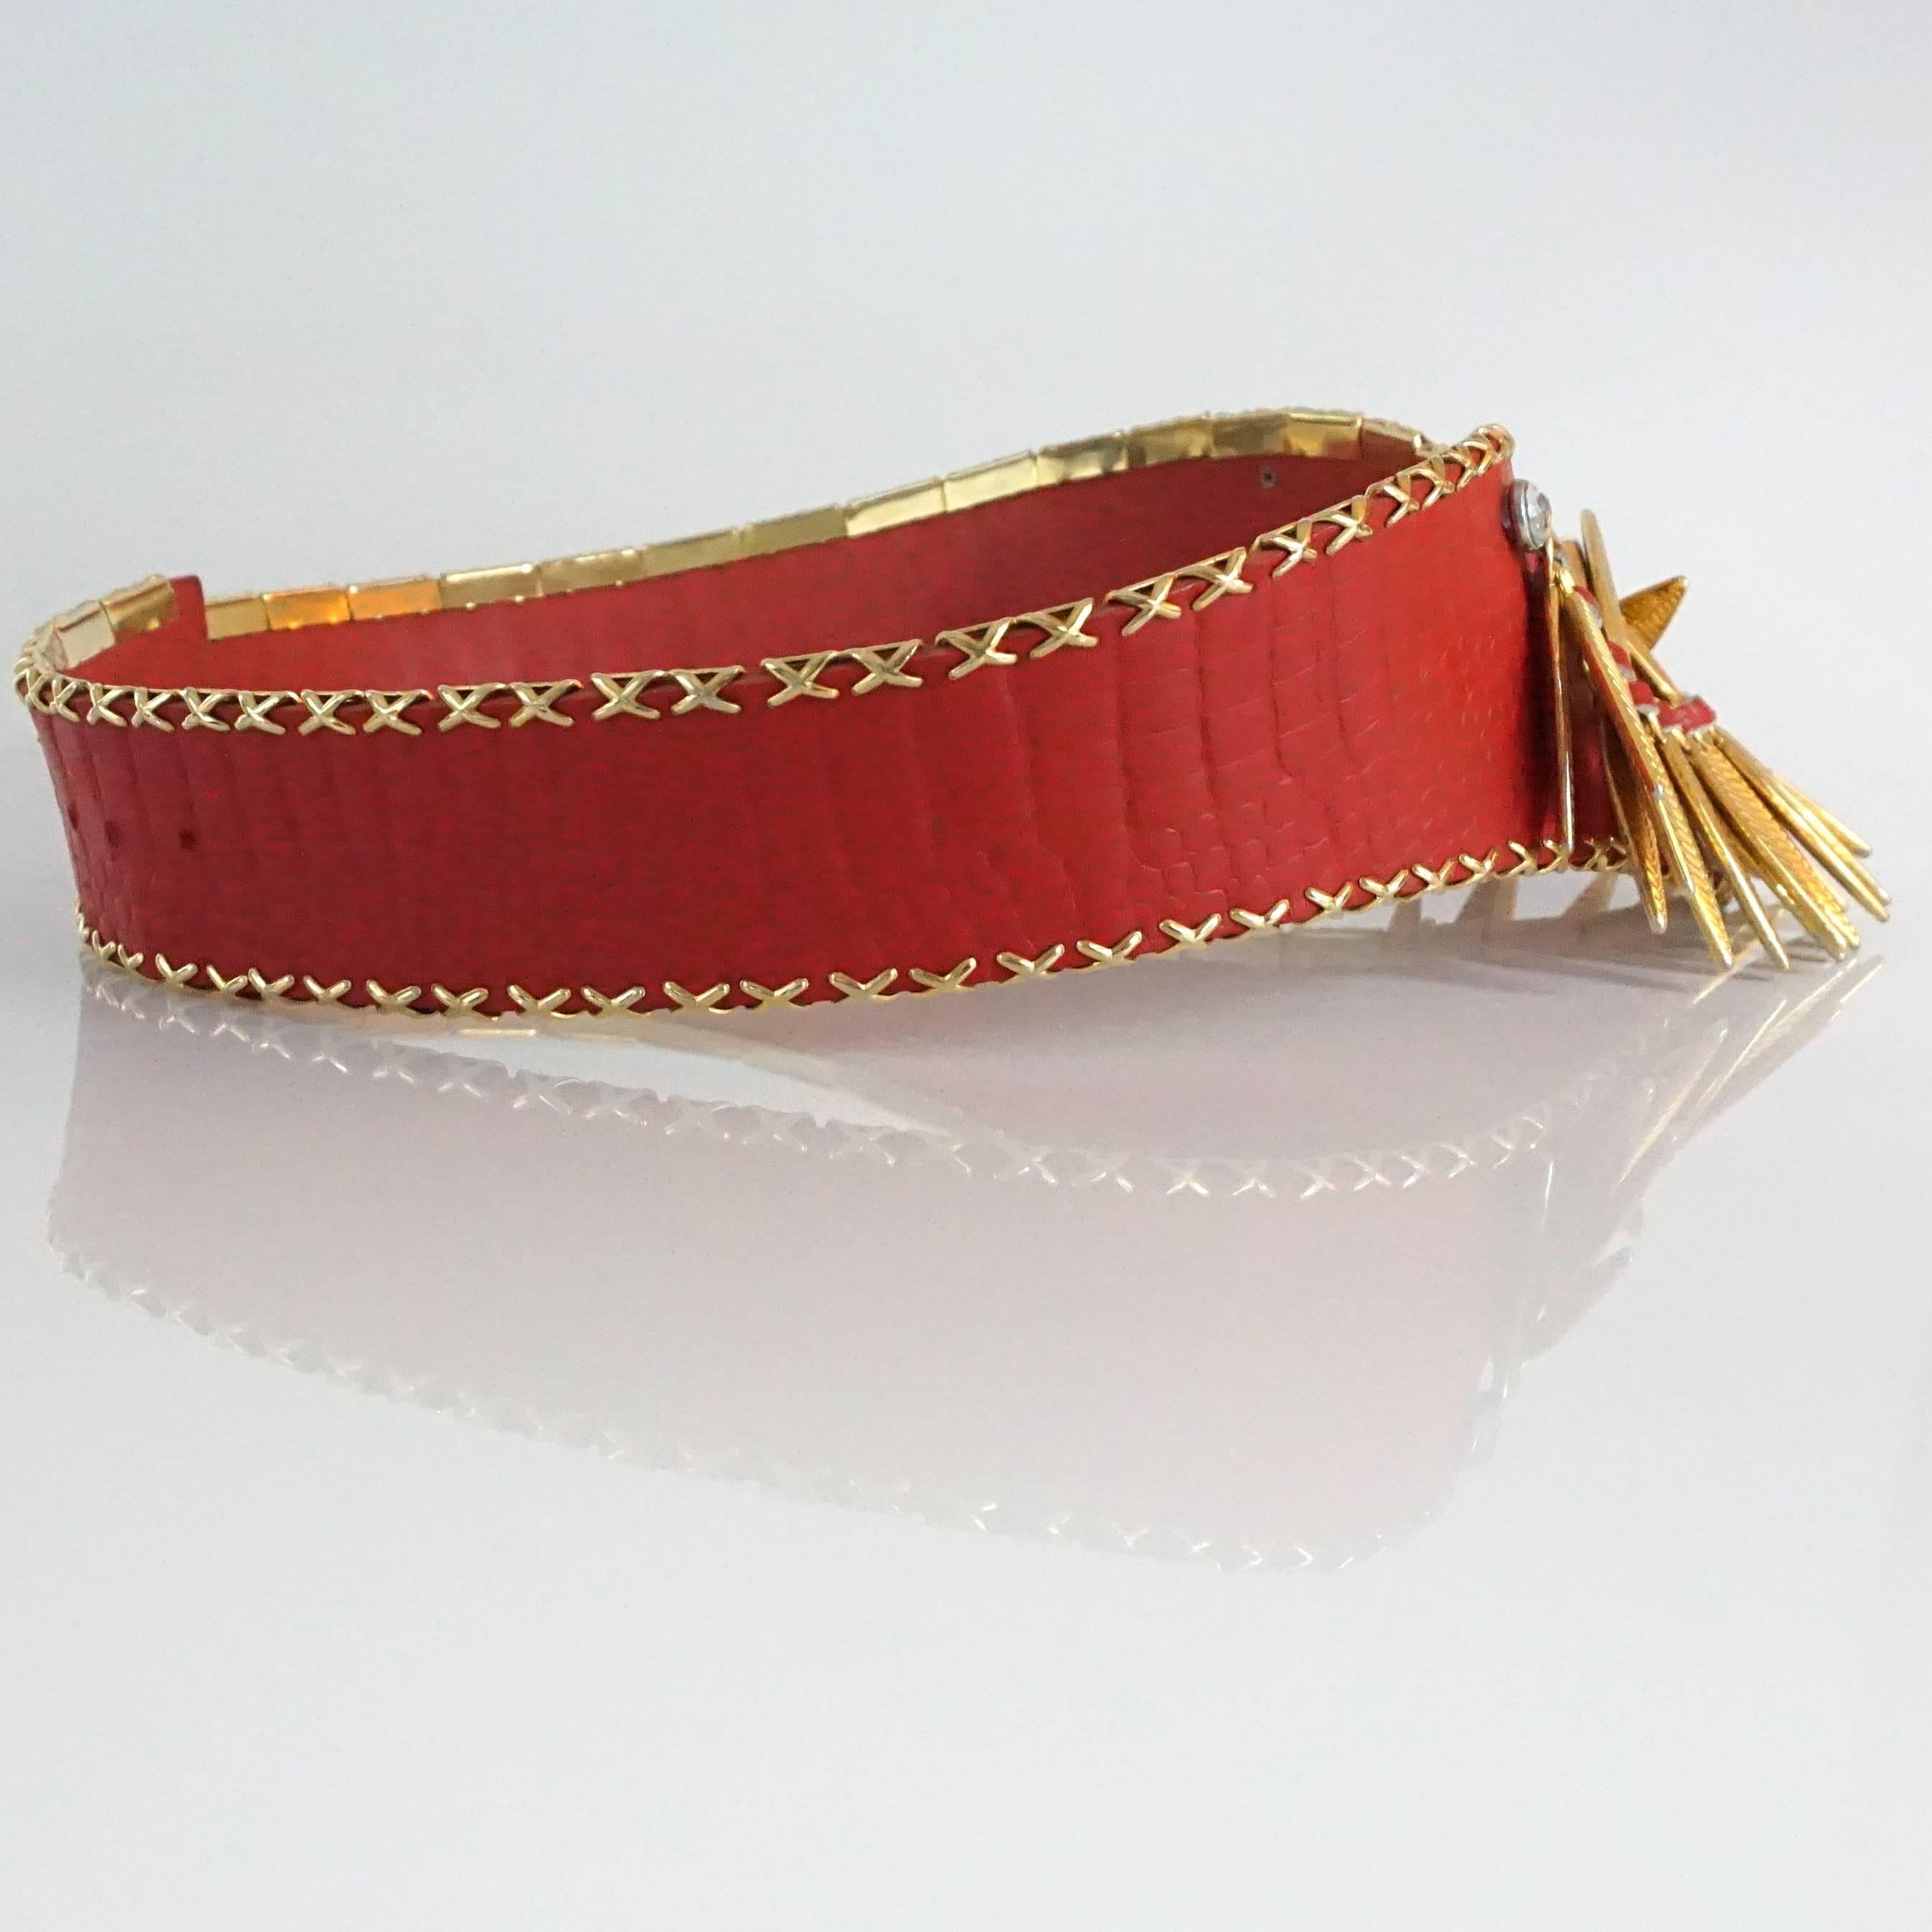 This Jose Cotel red croc embossed belt has a gold detailed metal trim with a woven leather chain in the front that has etched gold leaves. The belt is vintage from the 80's and has a v-shape. Its closure is a hook that closes in the back. It is in